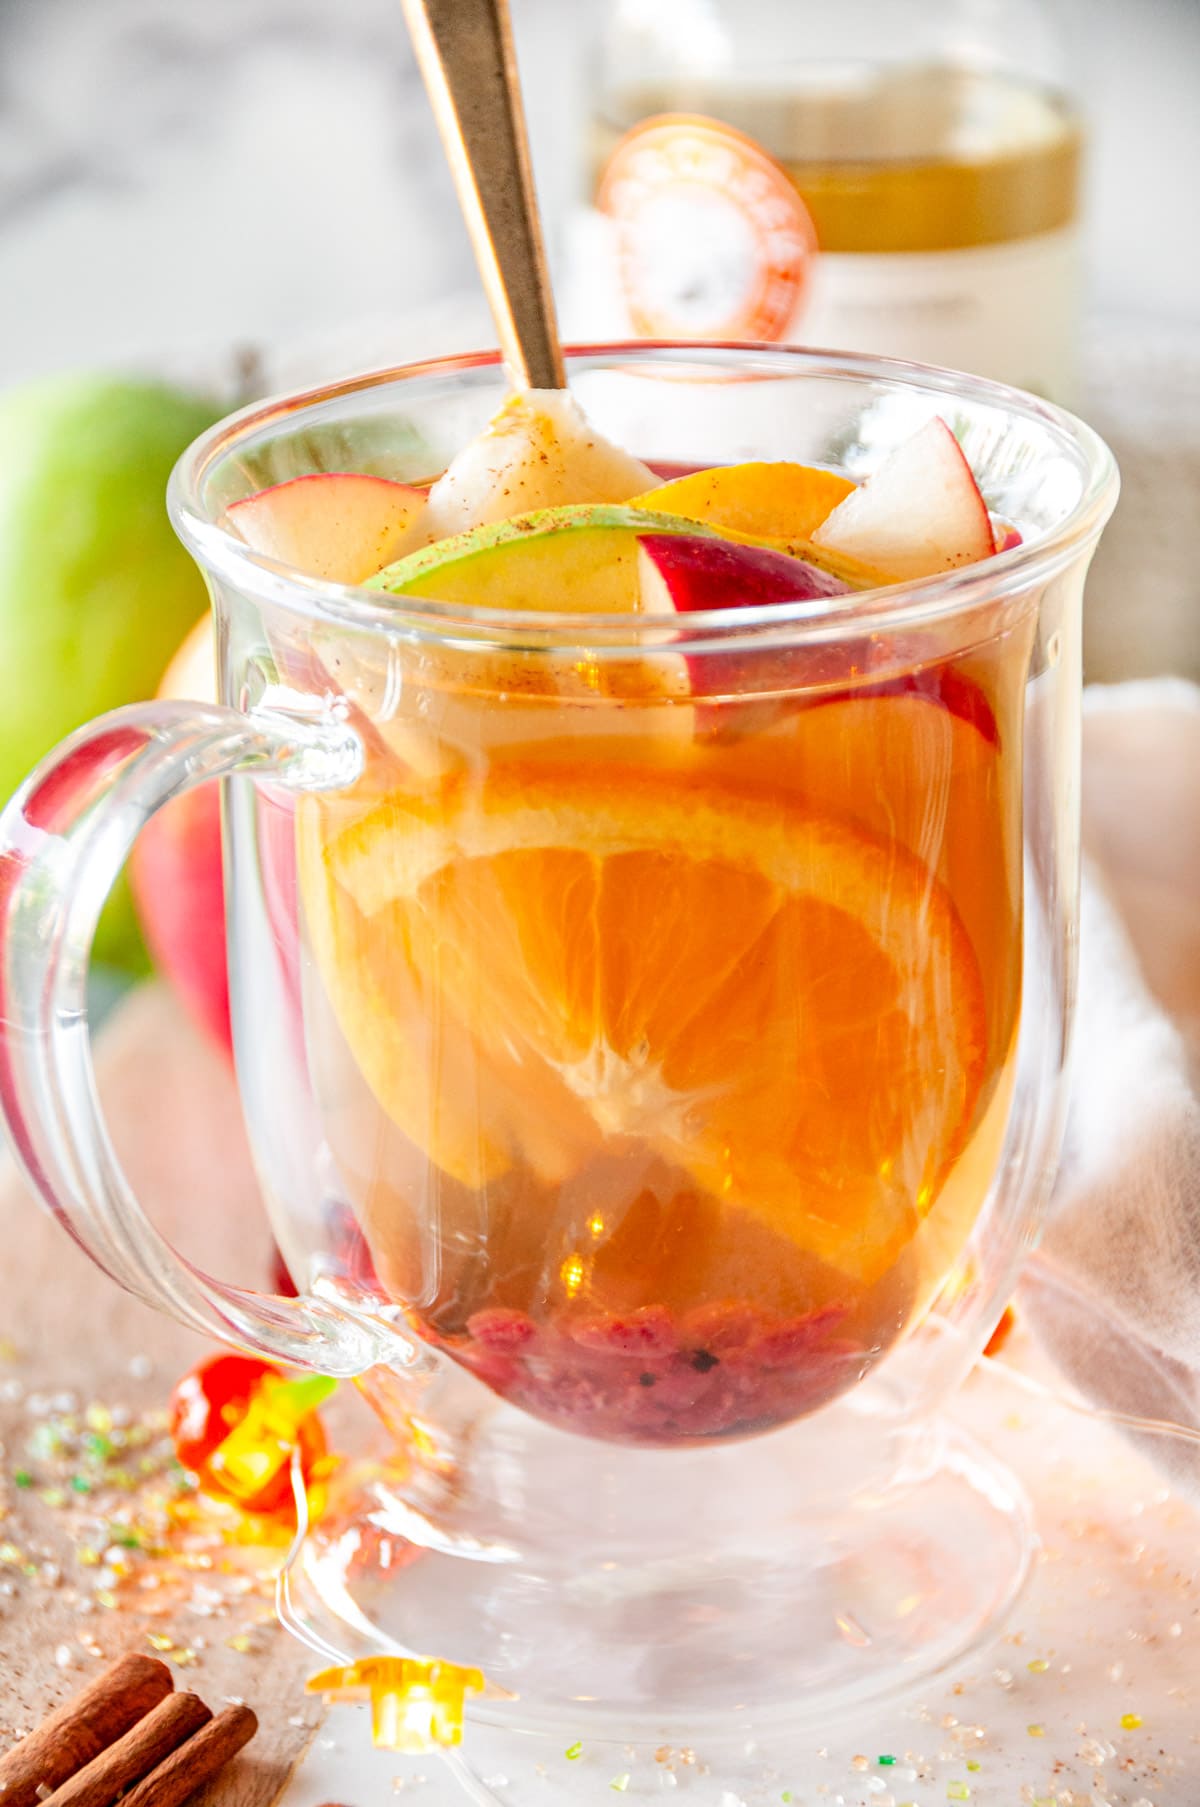 Spiced Apple Cider Sangria in glass mug with orange slices, apple slices, pomegranate seeds and cinnamon sticks on white marble.